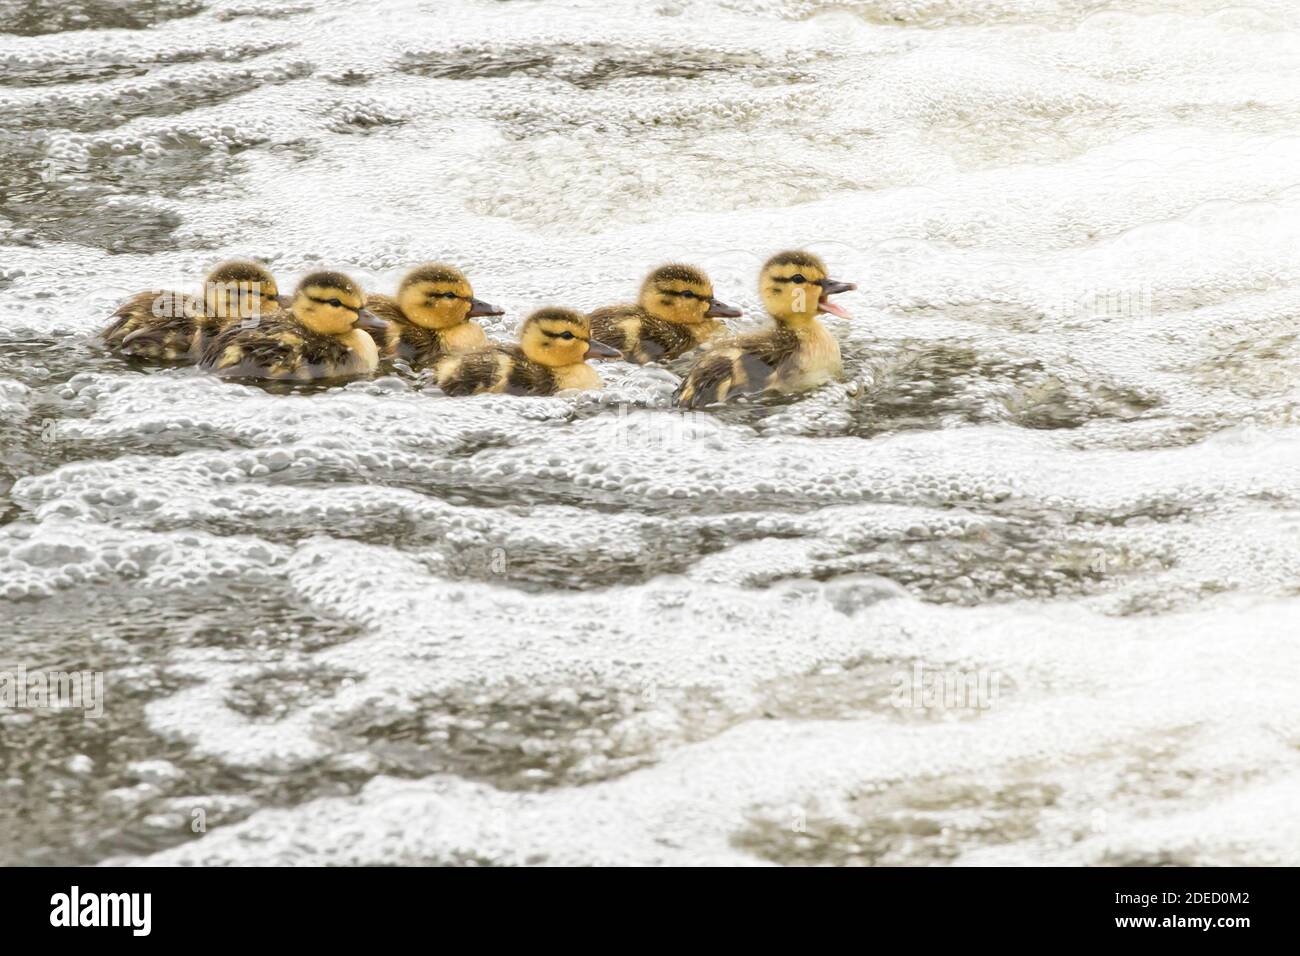 Mallard ducklings (Anas platyrhynchos) in bubbling water, separated from their mother, Long Island New York Stock Photo